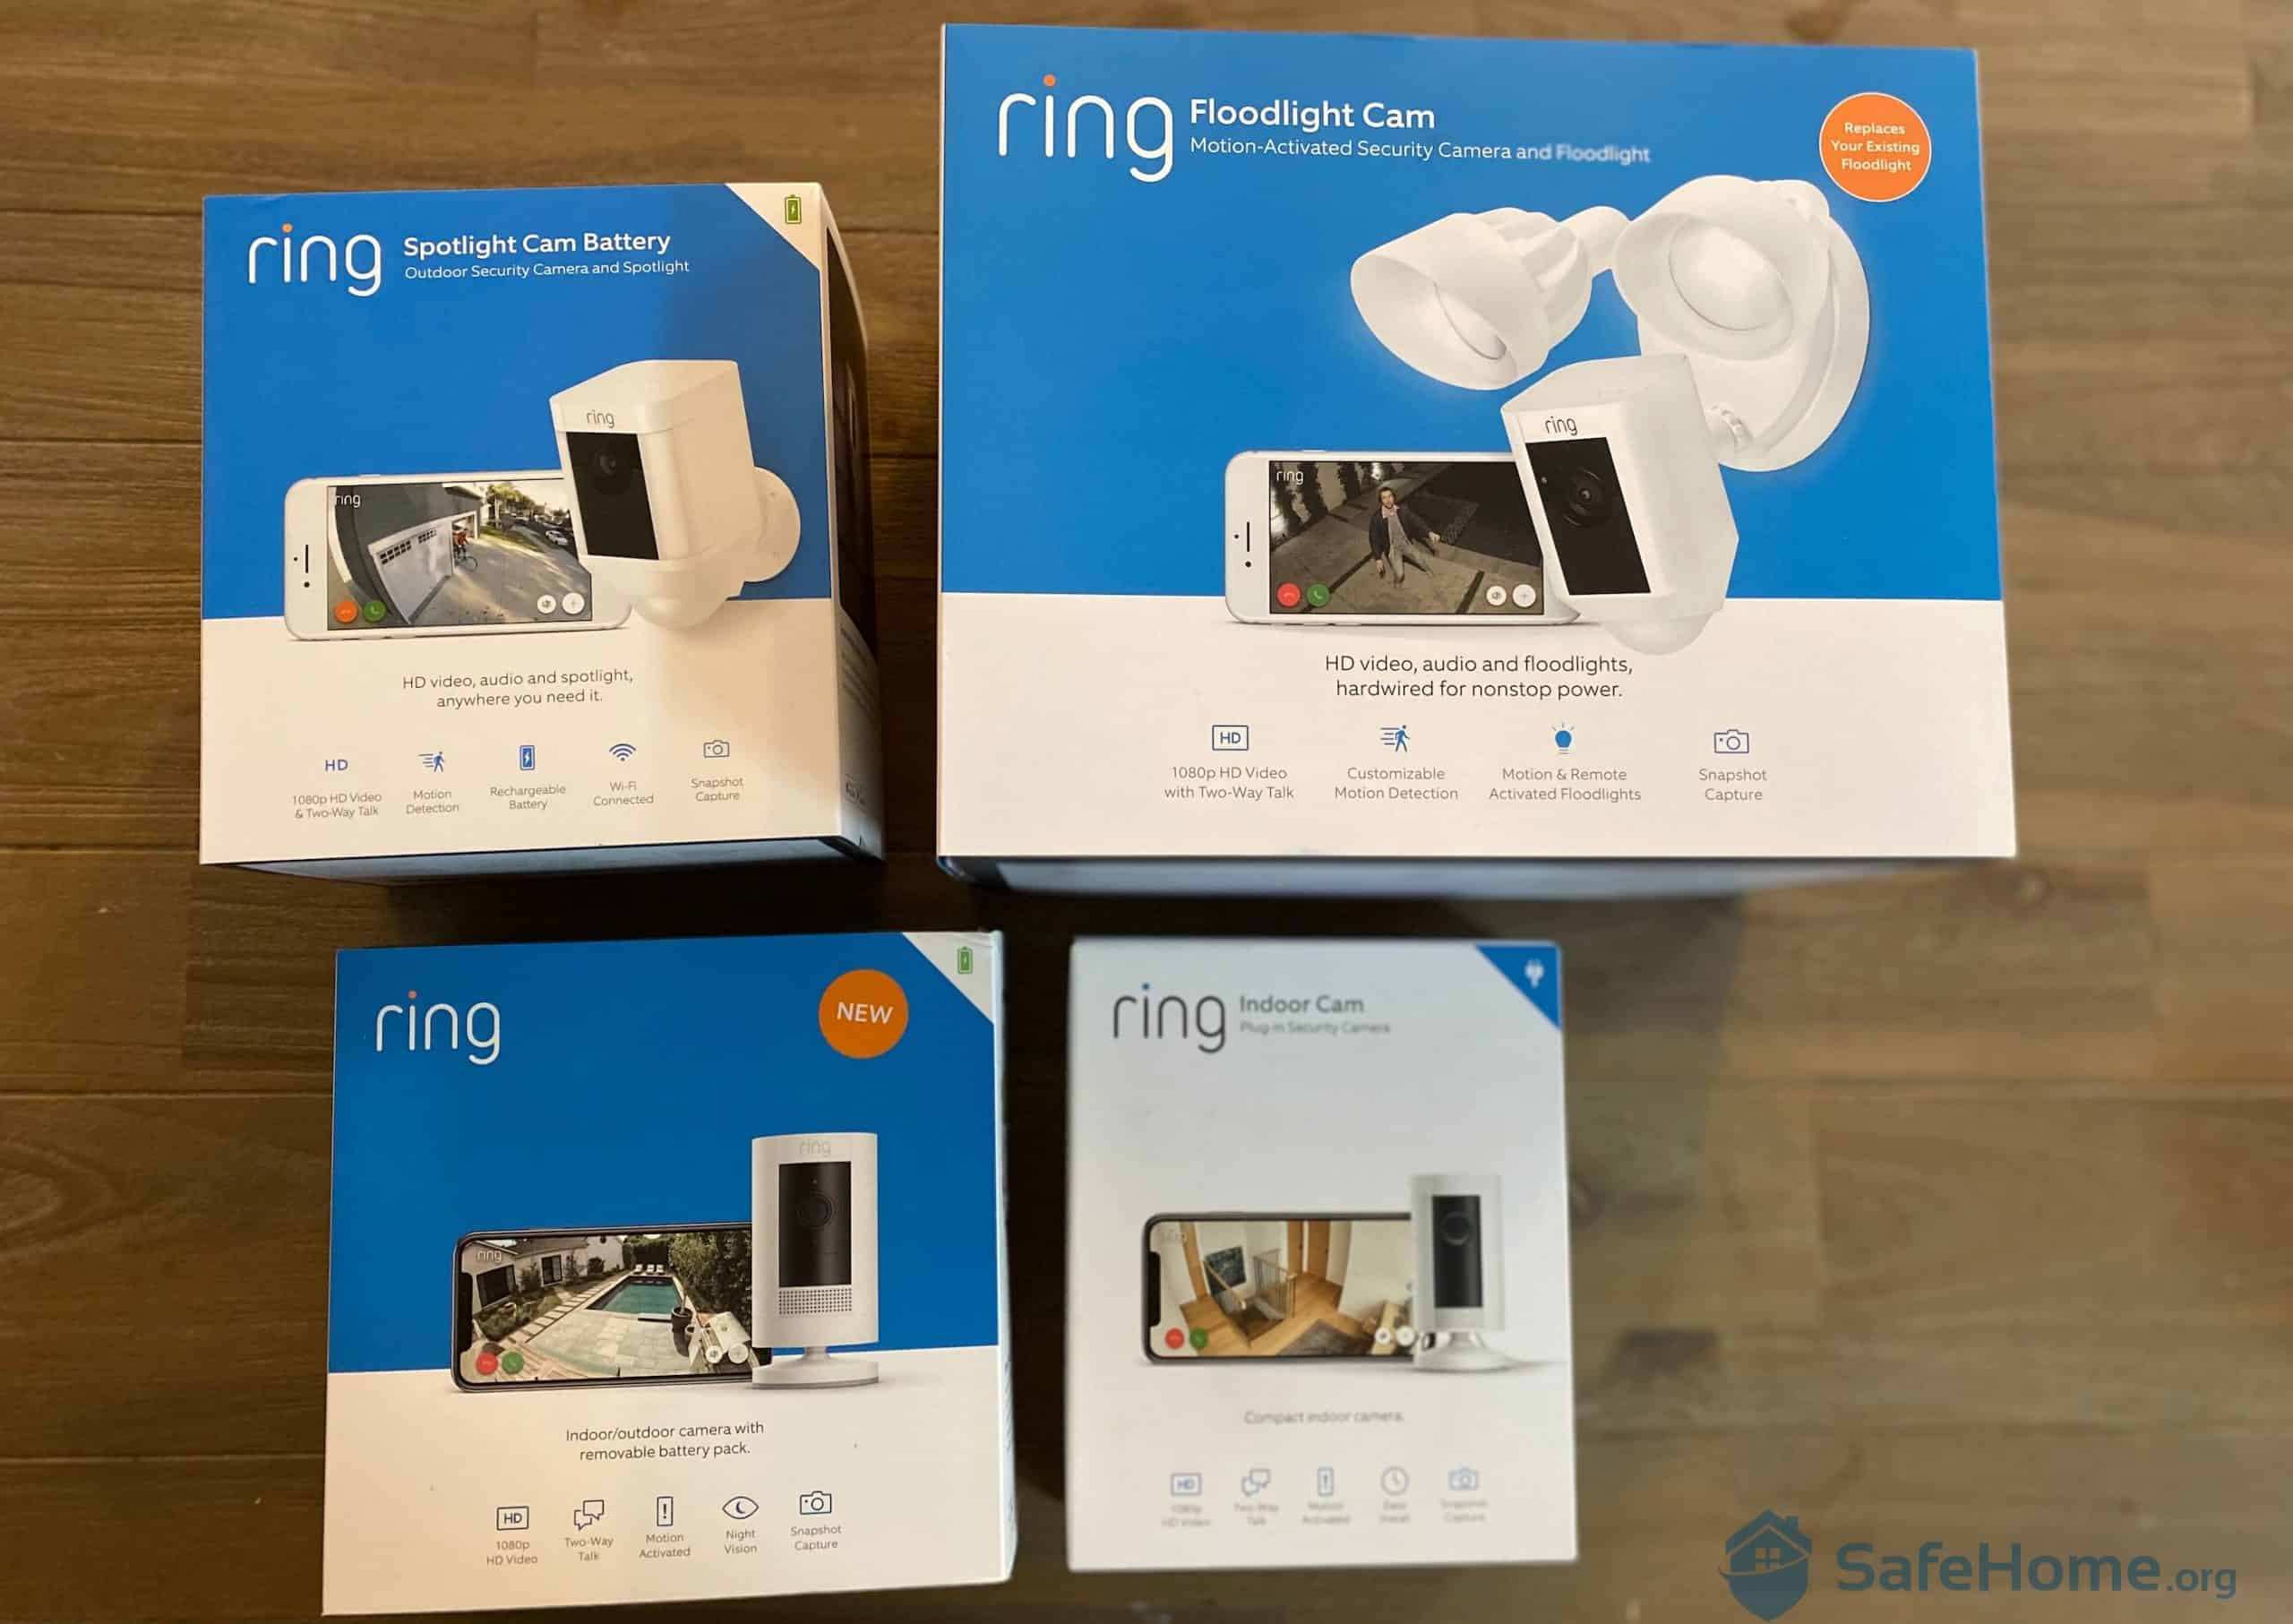 https://www.safehome.org/app/uploads/2020/08/Ring-Cameras-Boxed-Up2-scaled.jpg